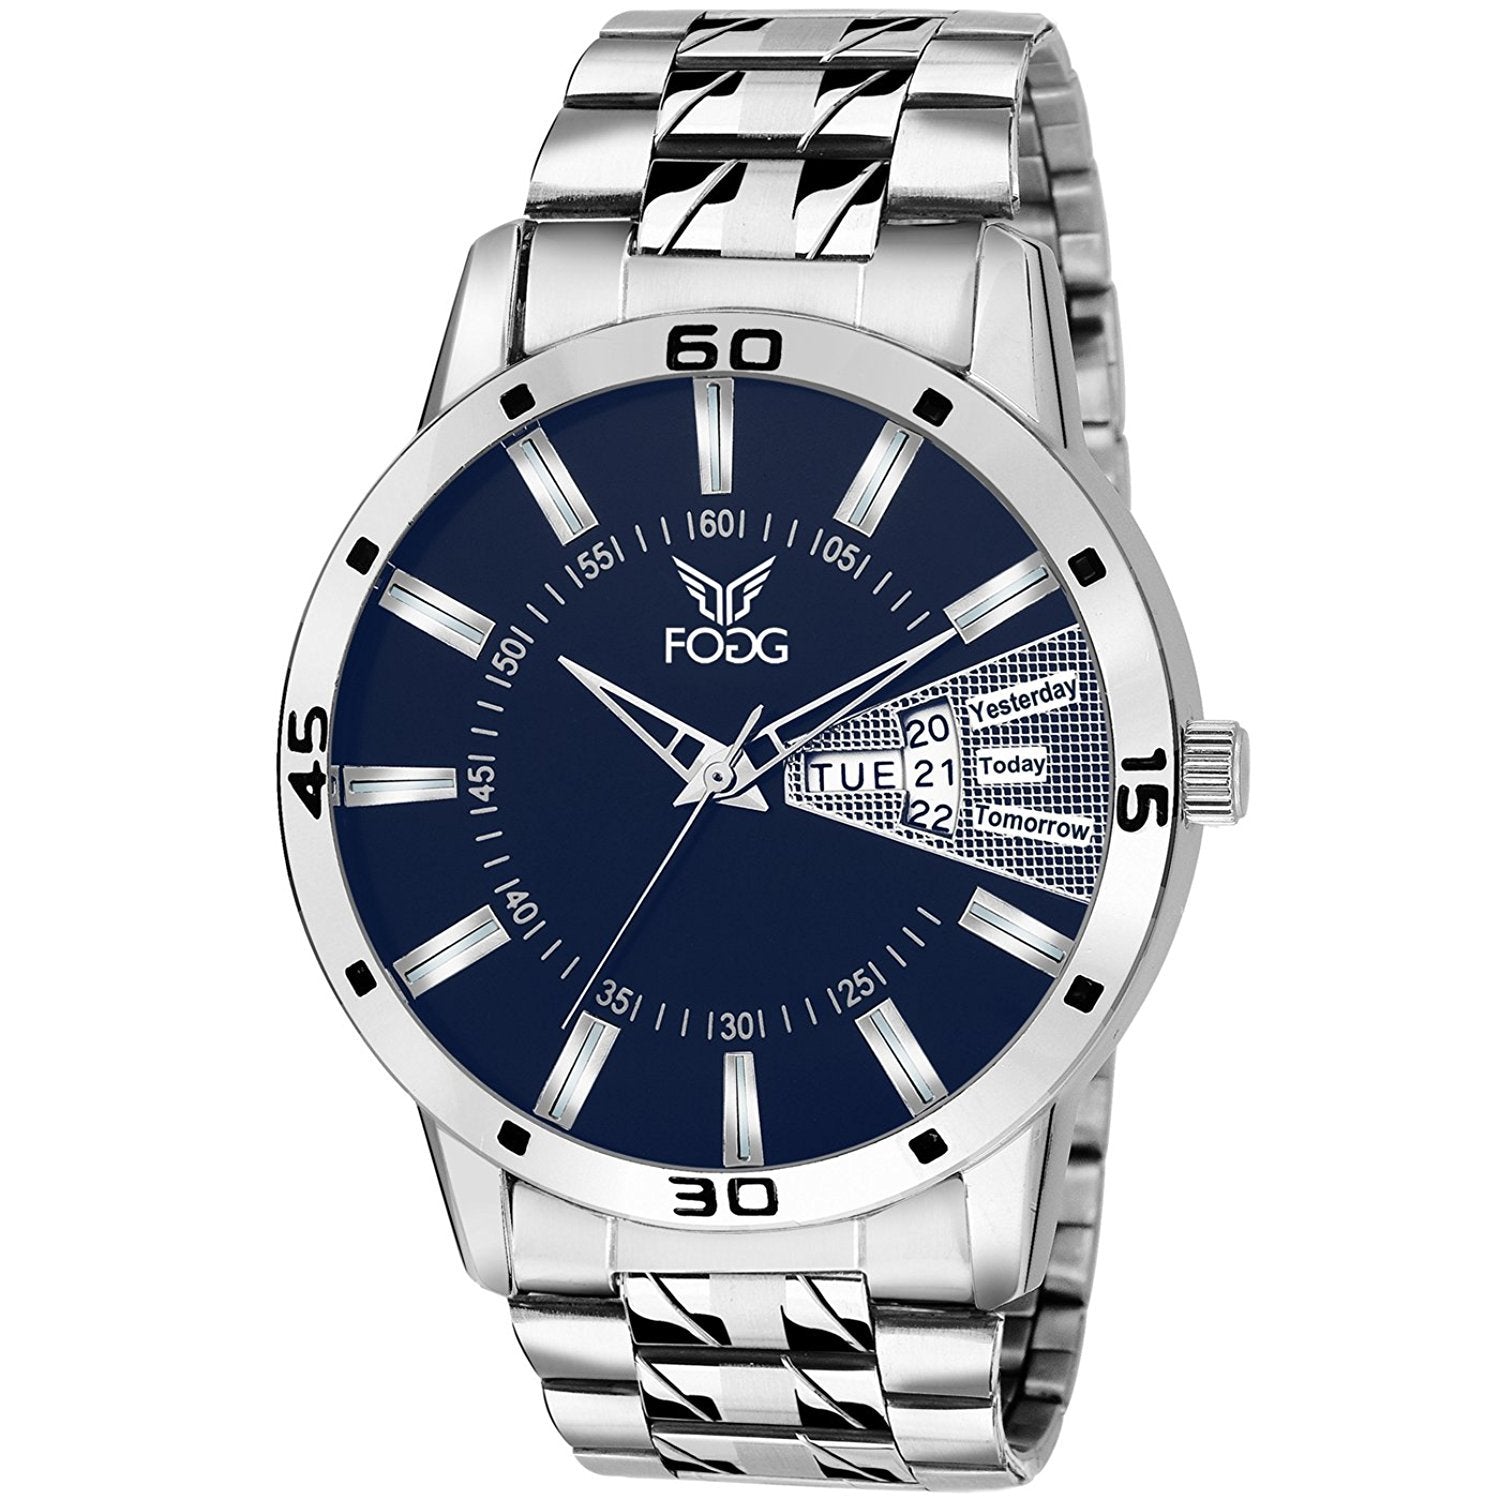 2047-BL Working Day and Date Analog Watch - For Men ()